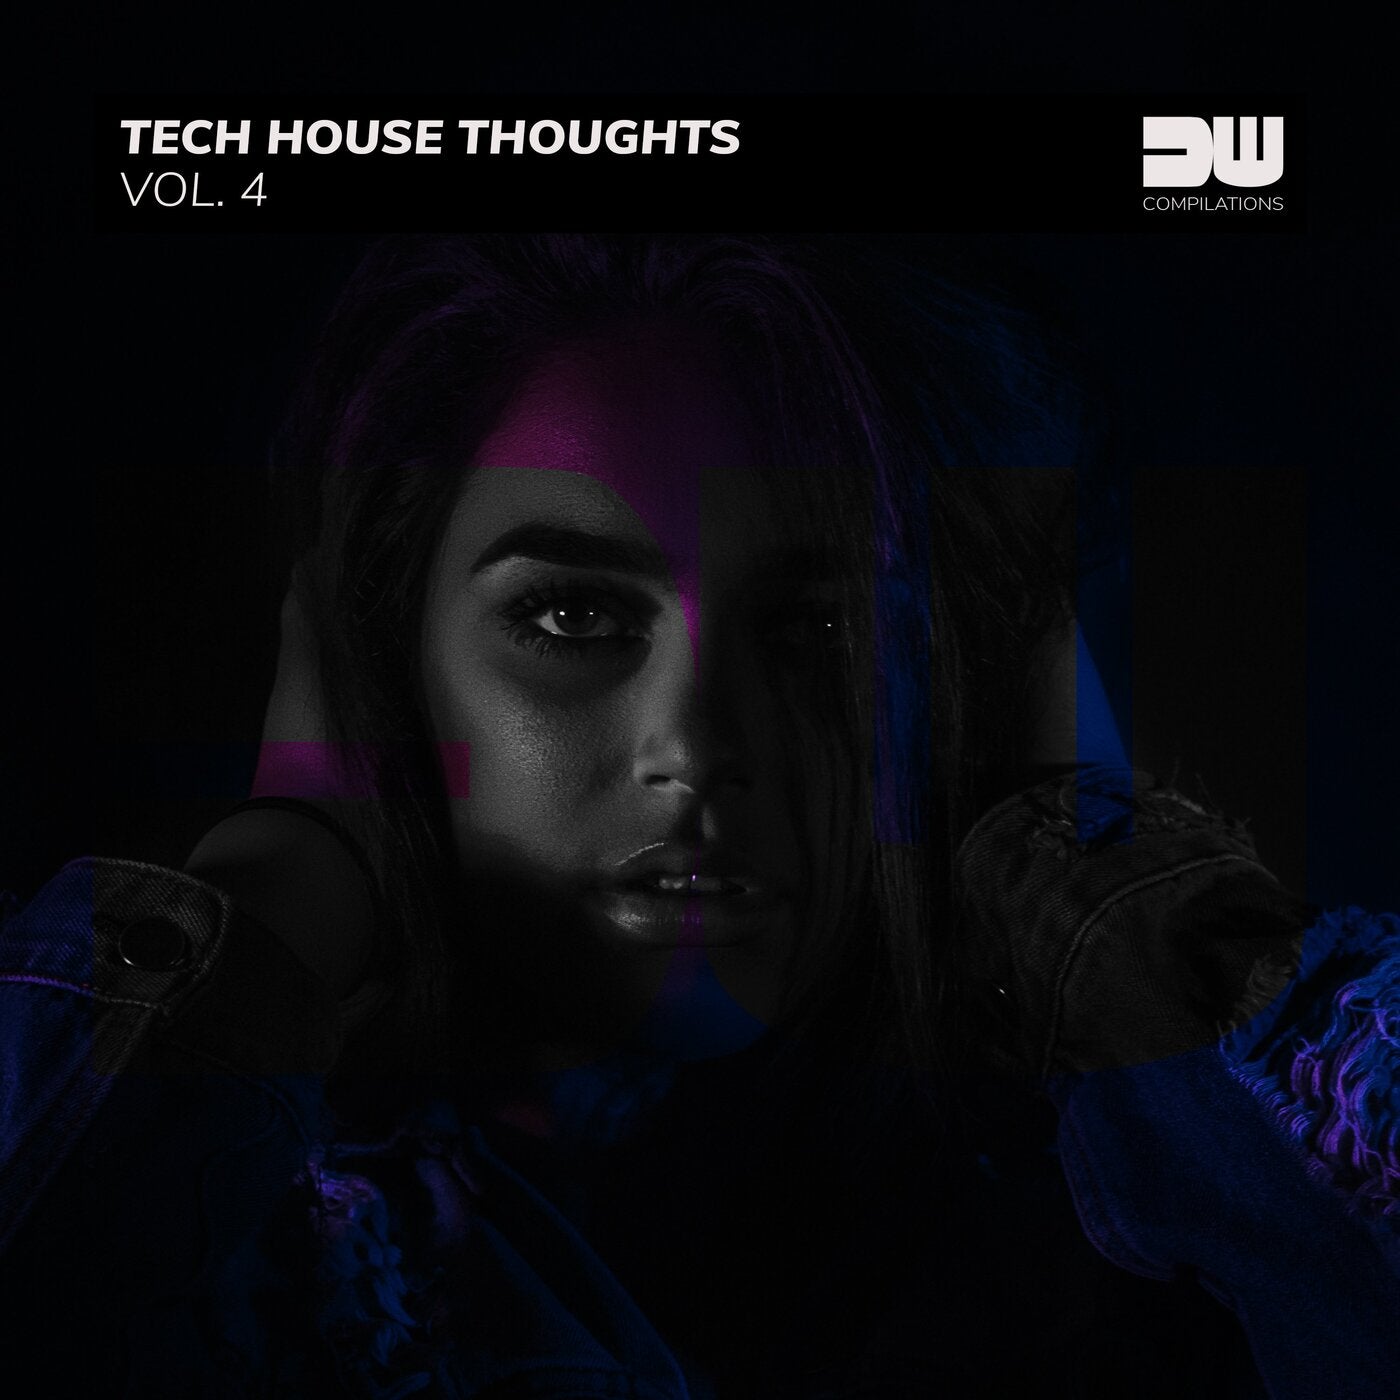 Tech House Thoughts, Vol. 4